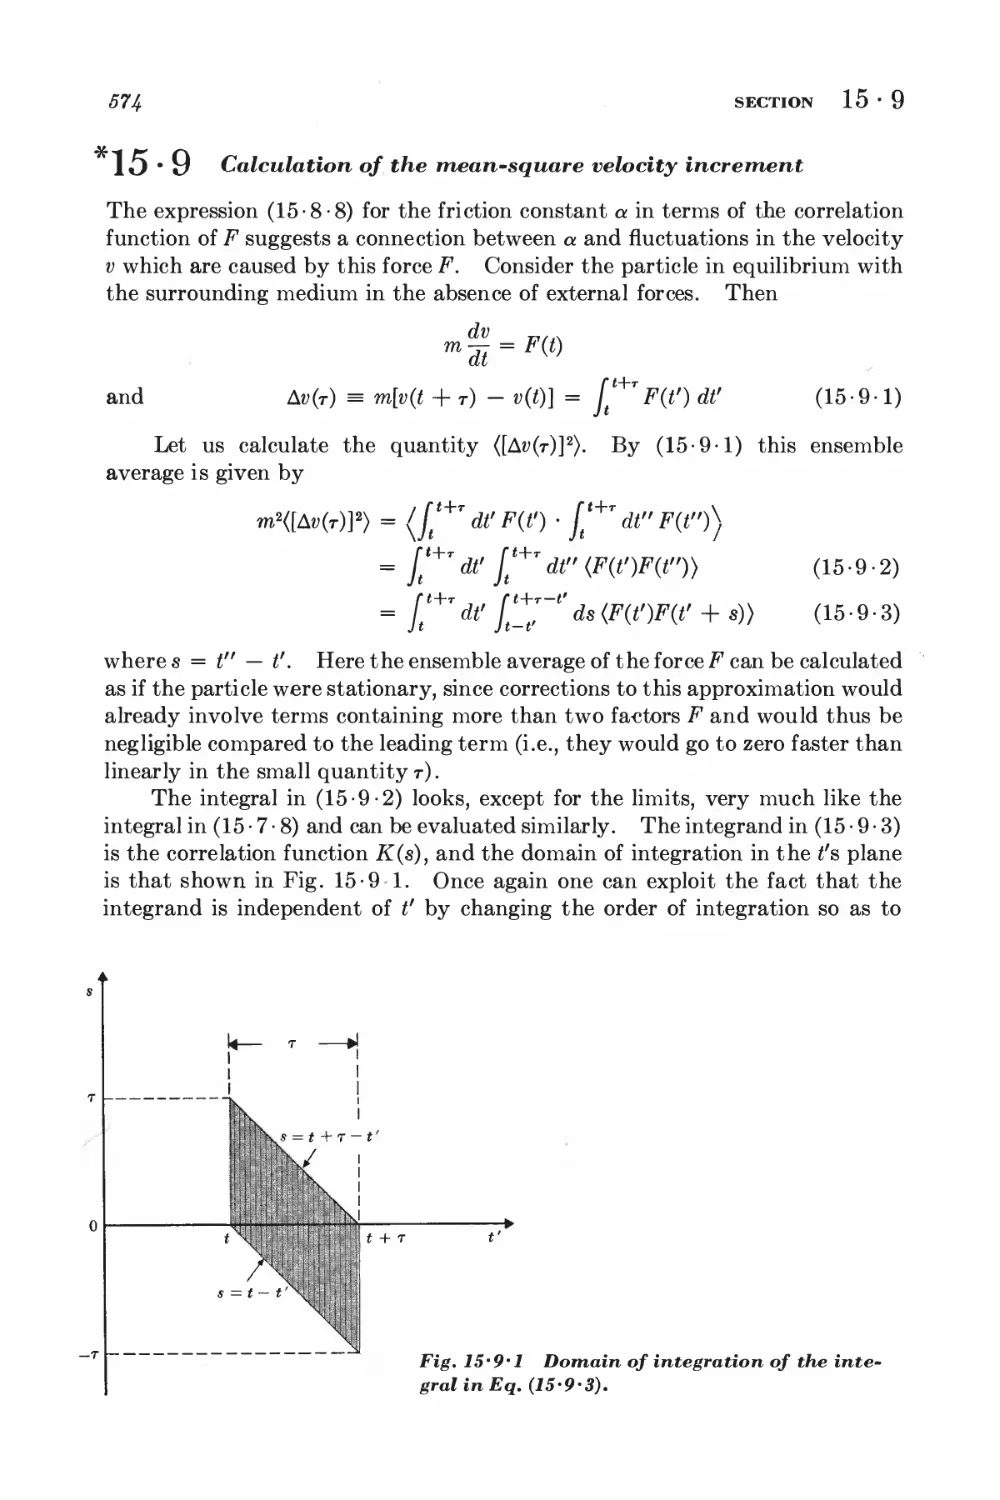 15.9 Calculation of the mean-square velocity increment